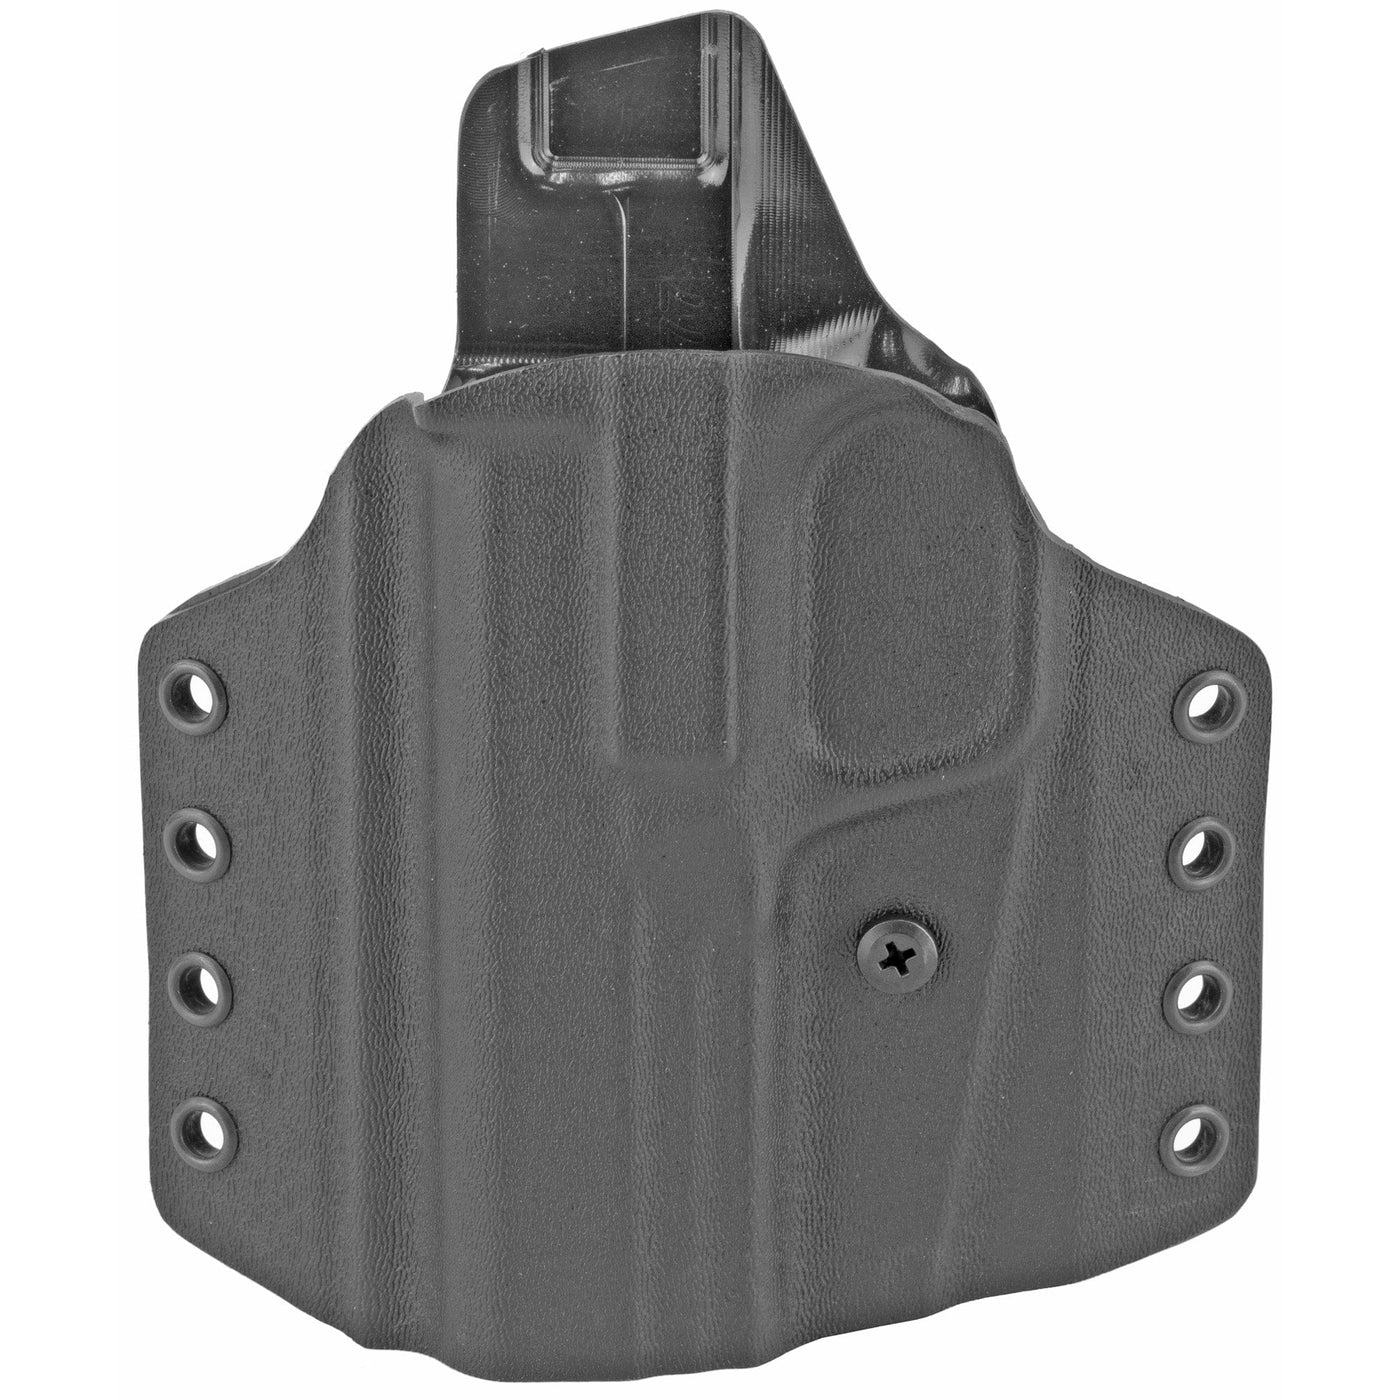 Uncle Mike's U/m Ccw Hlst M&p/cmp 9/40 2.0 Lh Blk Holsters